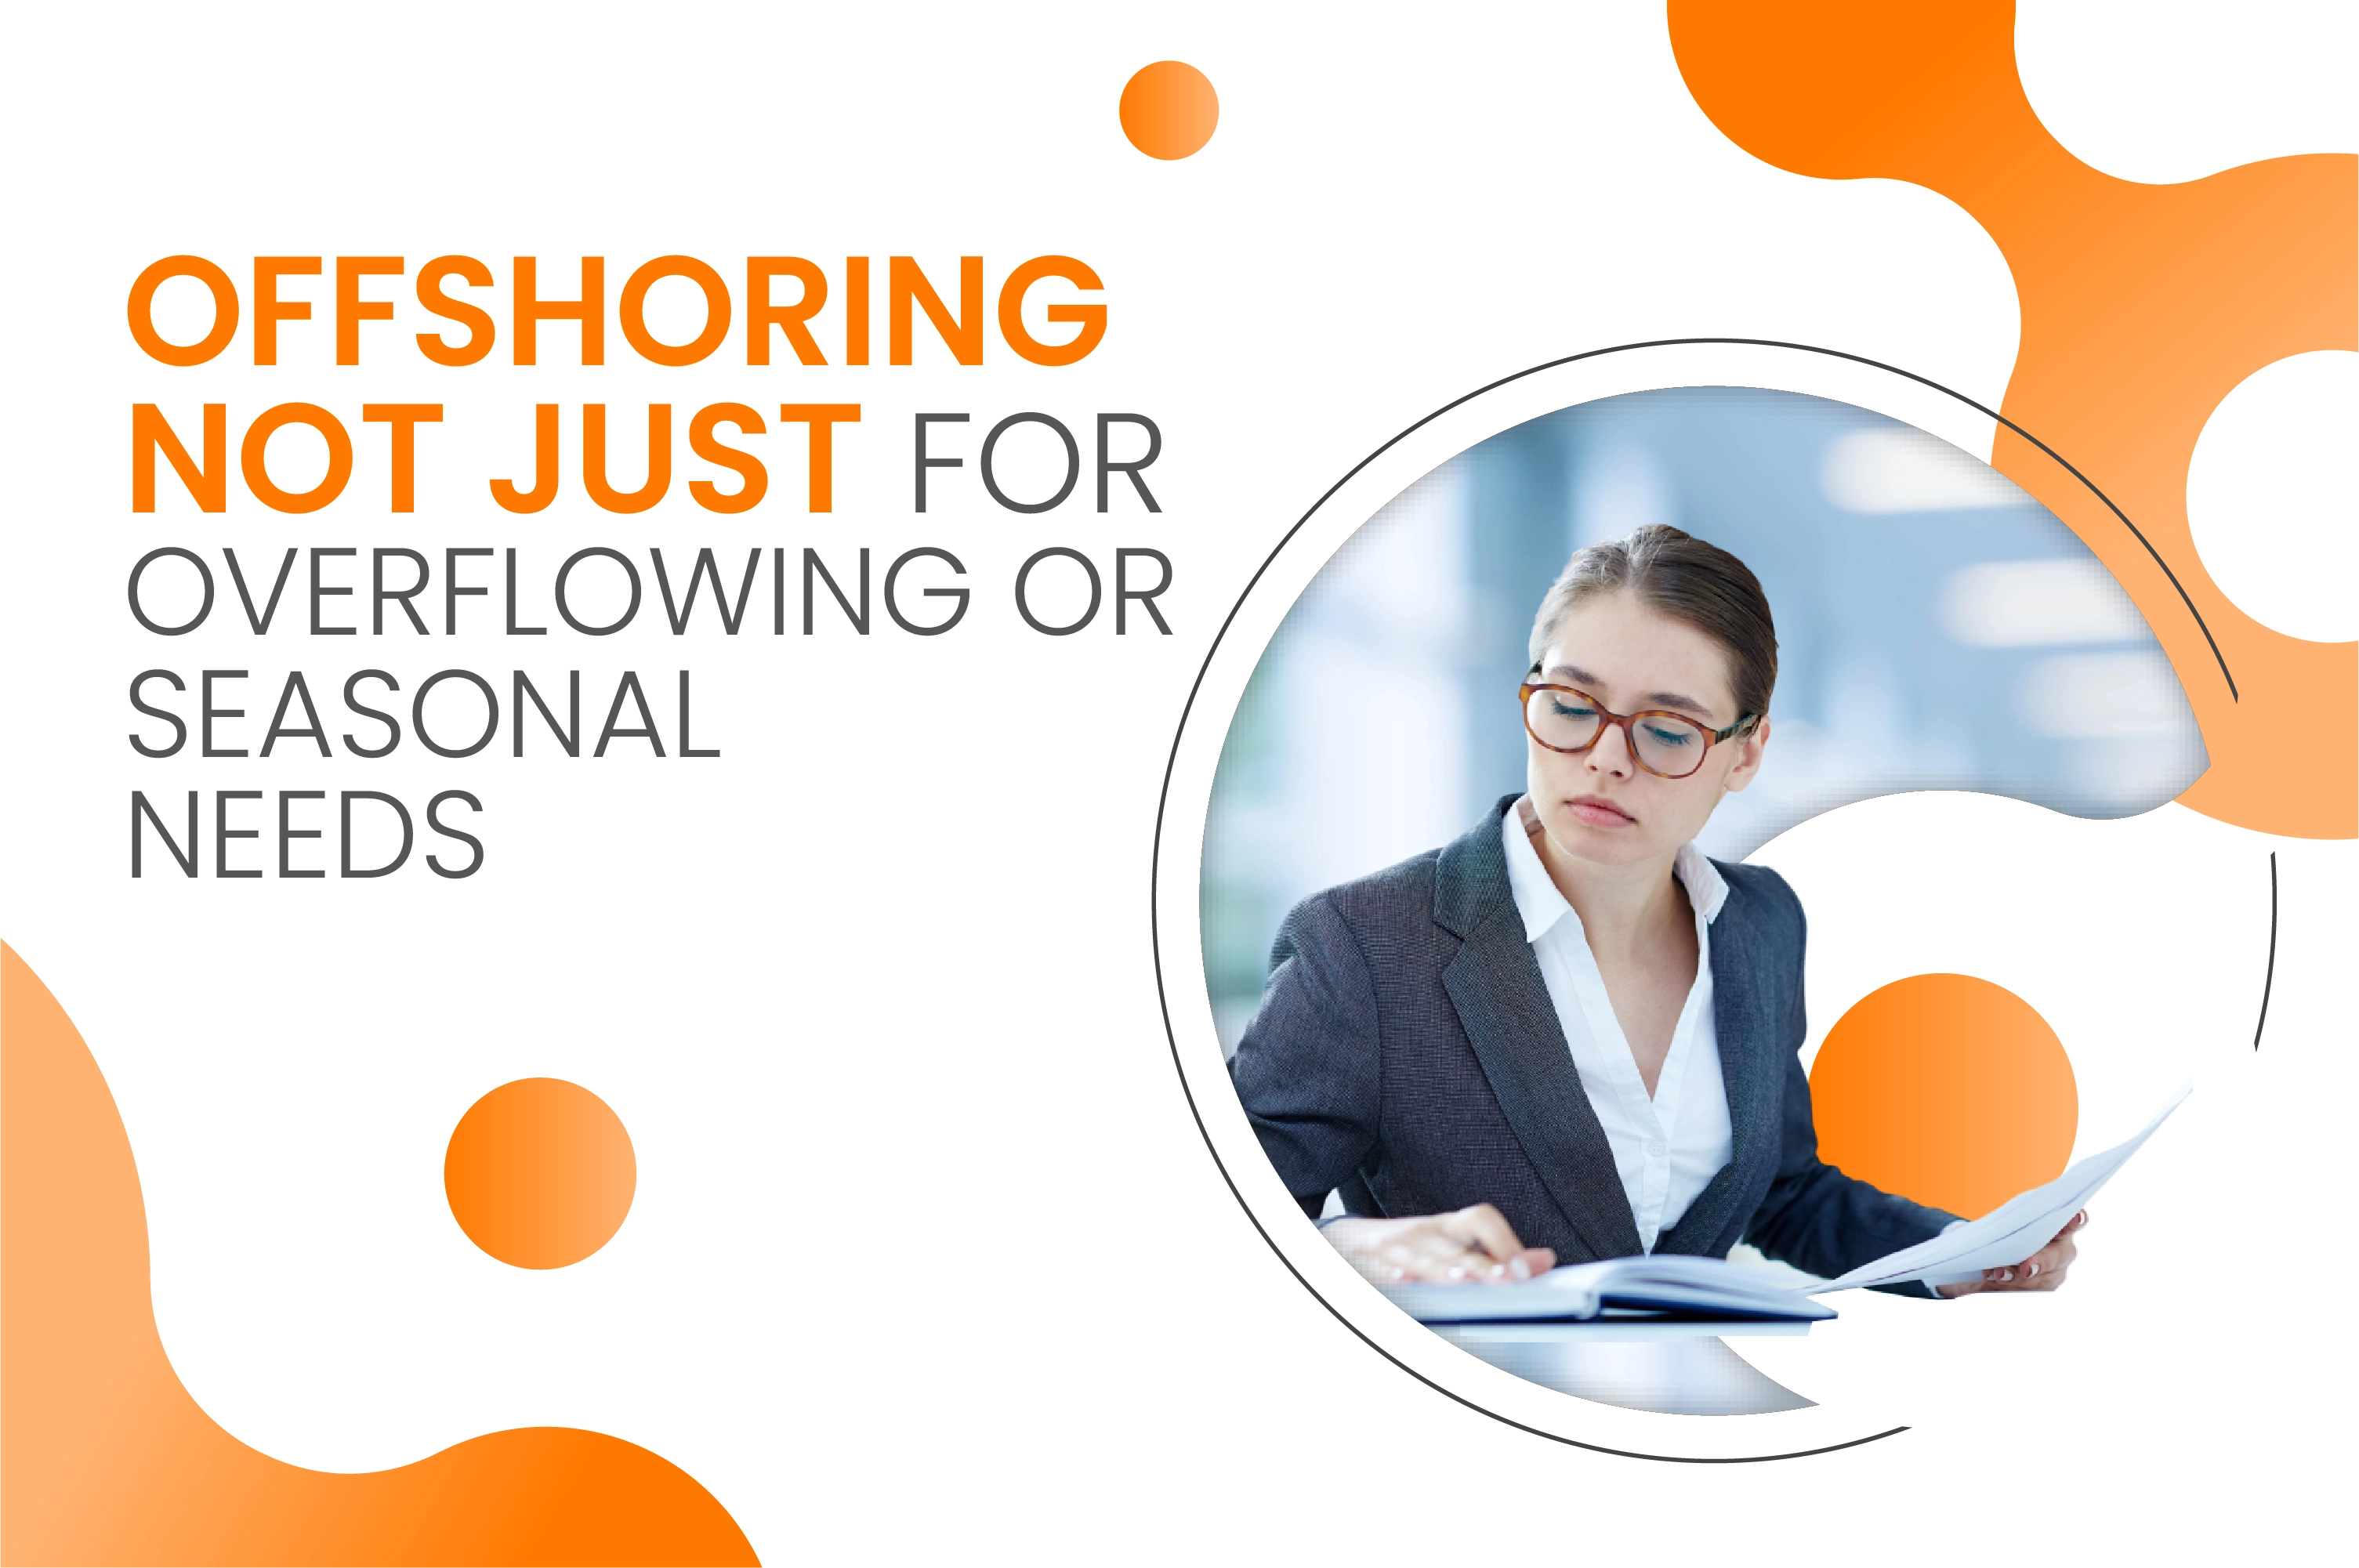 Offshoring Accounting: Not Just for Overflow or Seasonal Needs